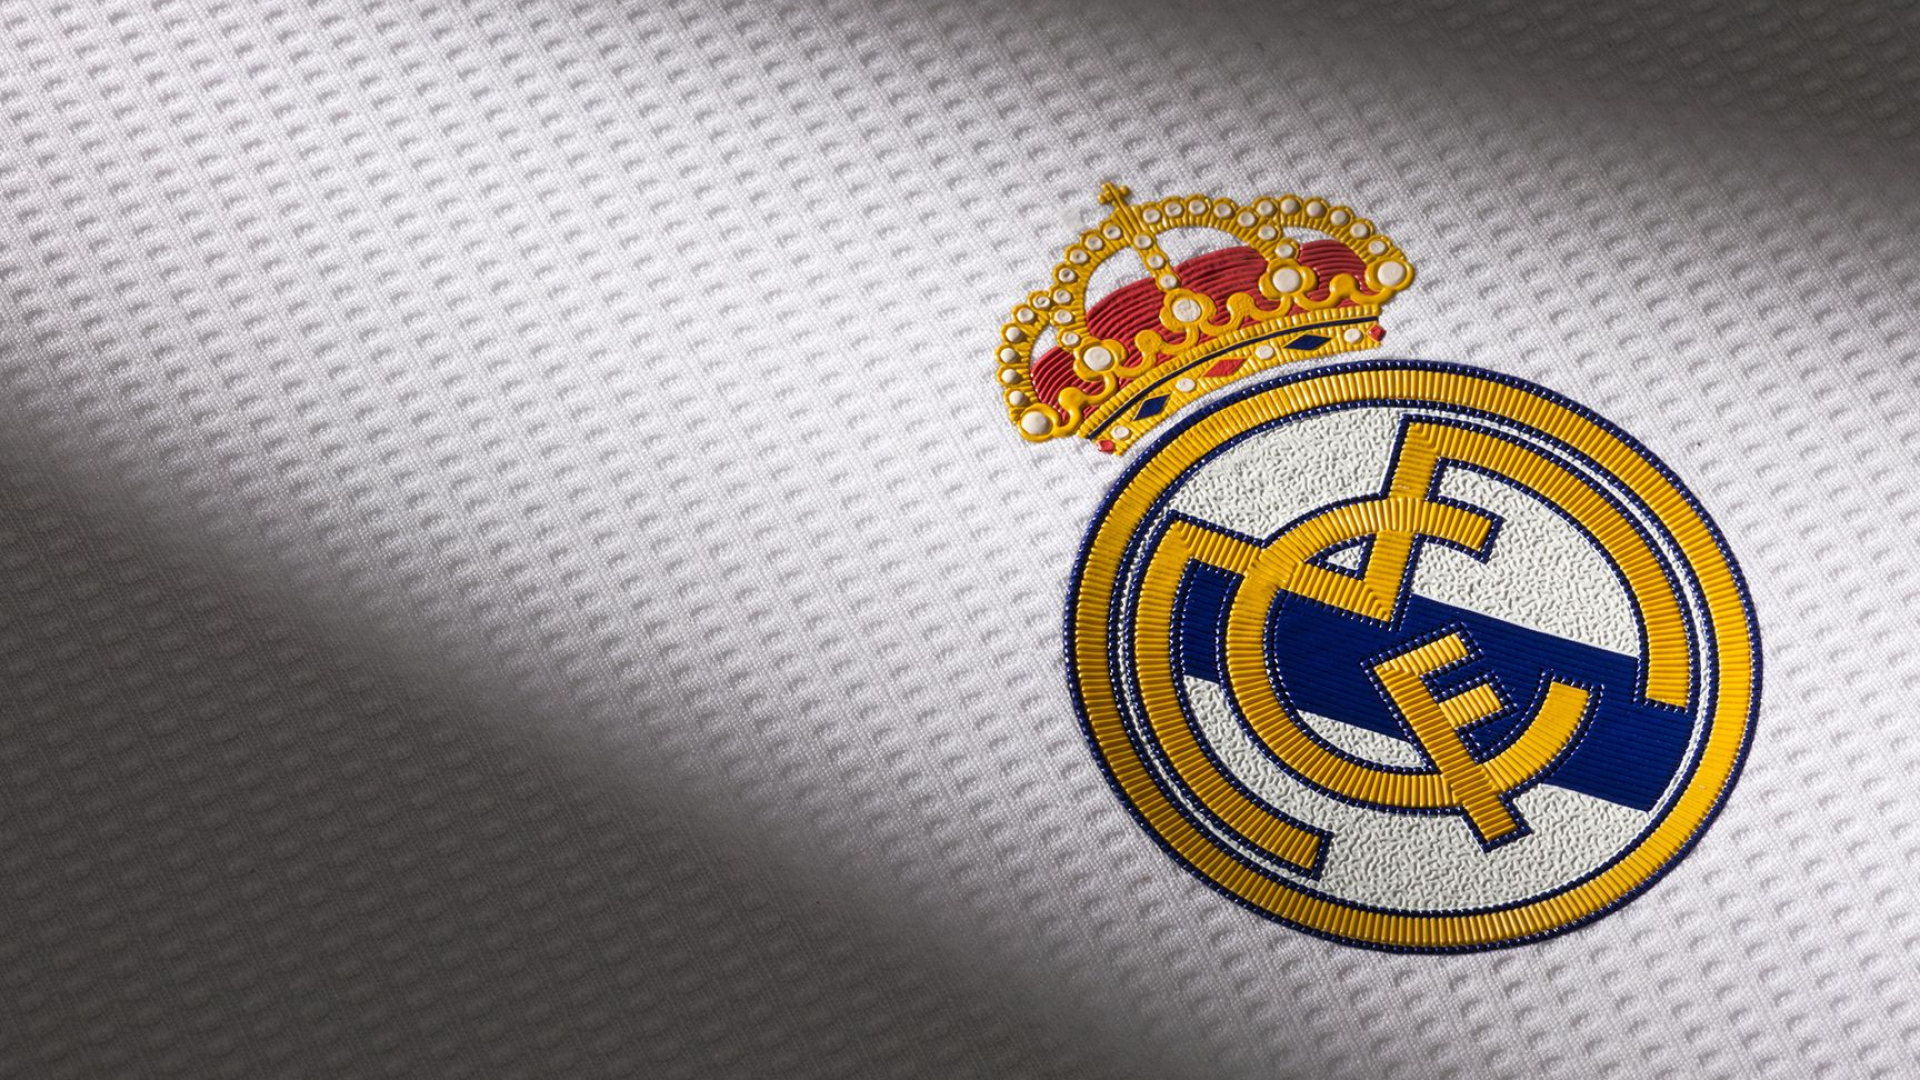 1920x1080 Real Madrid Poster Best Wallpaper HD | Madrid wallpaper, Real madrid wallpapers, Real madrid logo wallpapers